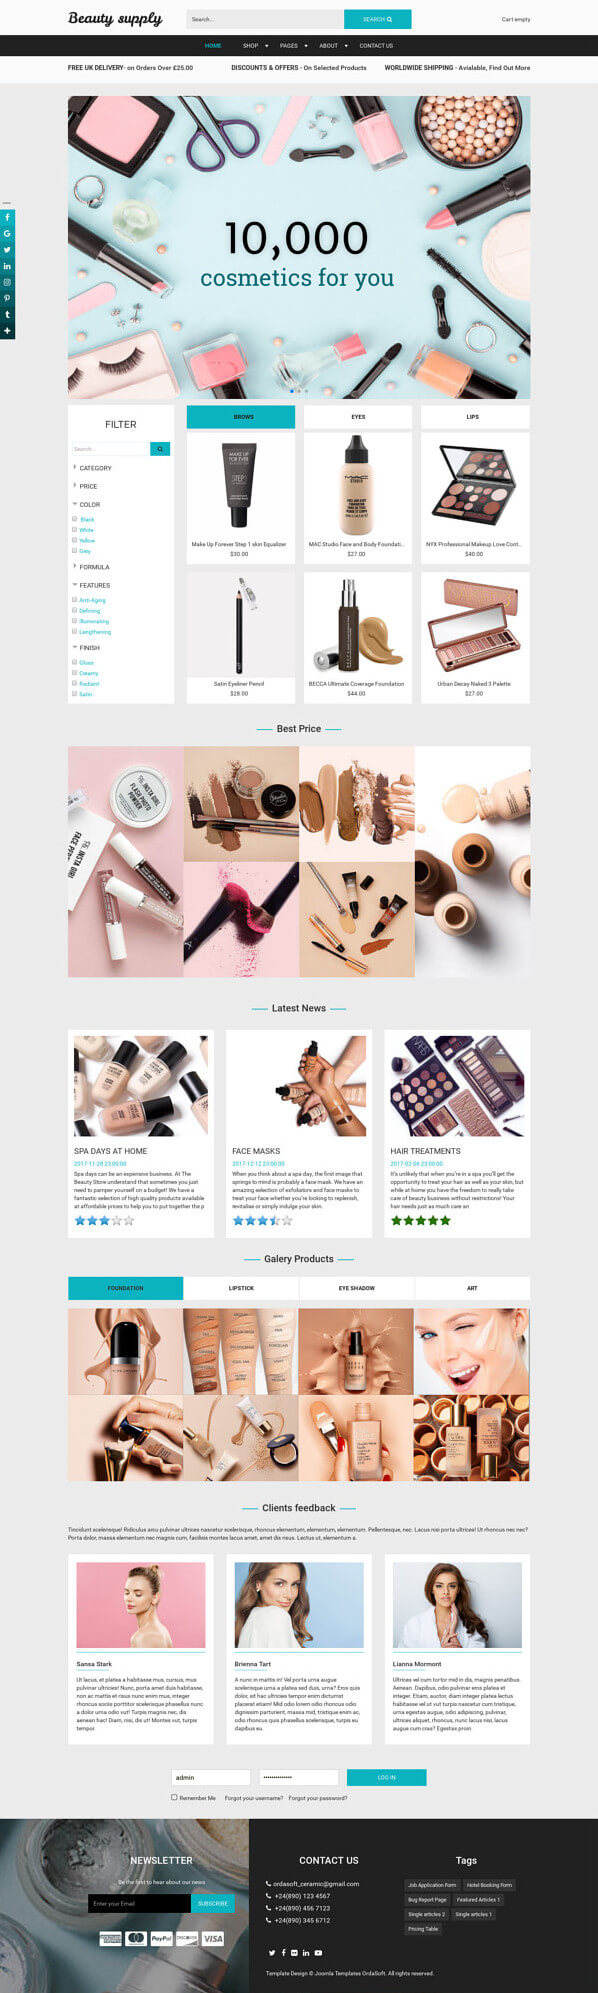 Beauty Supply - eCommerce Joomla template, for create online beauty store website